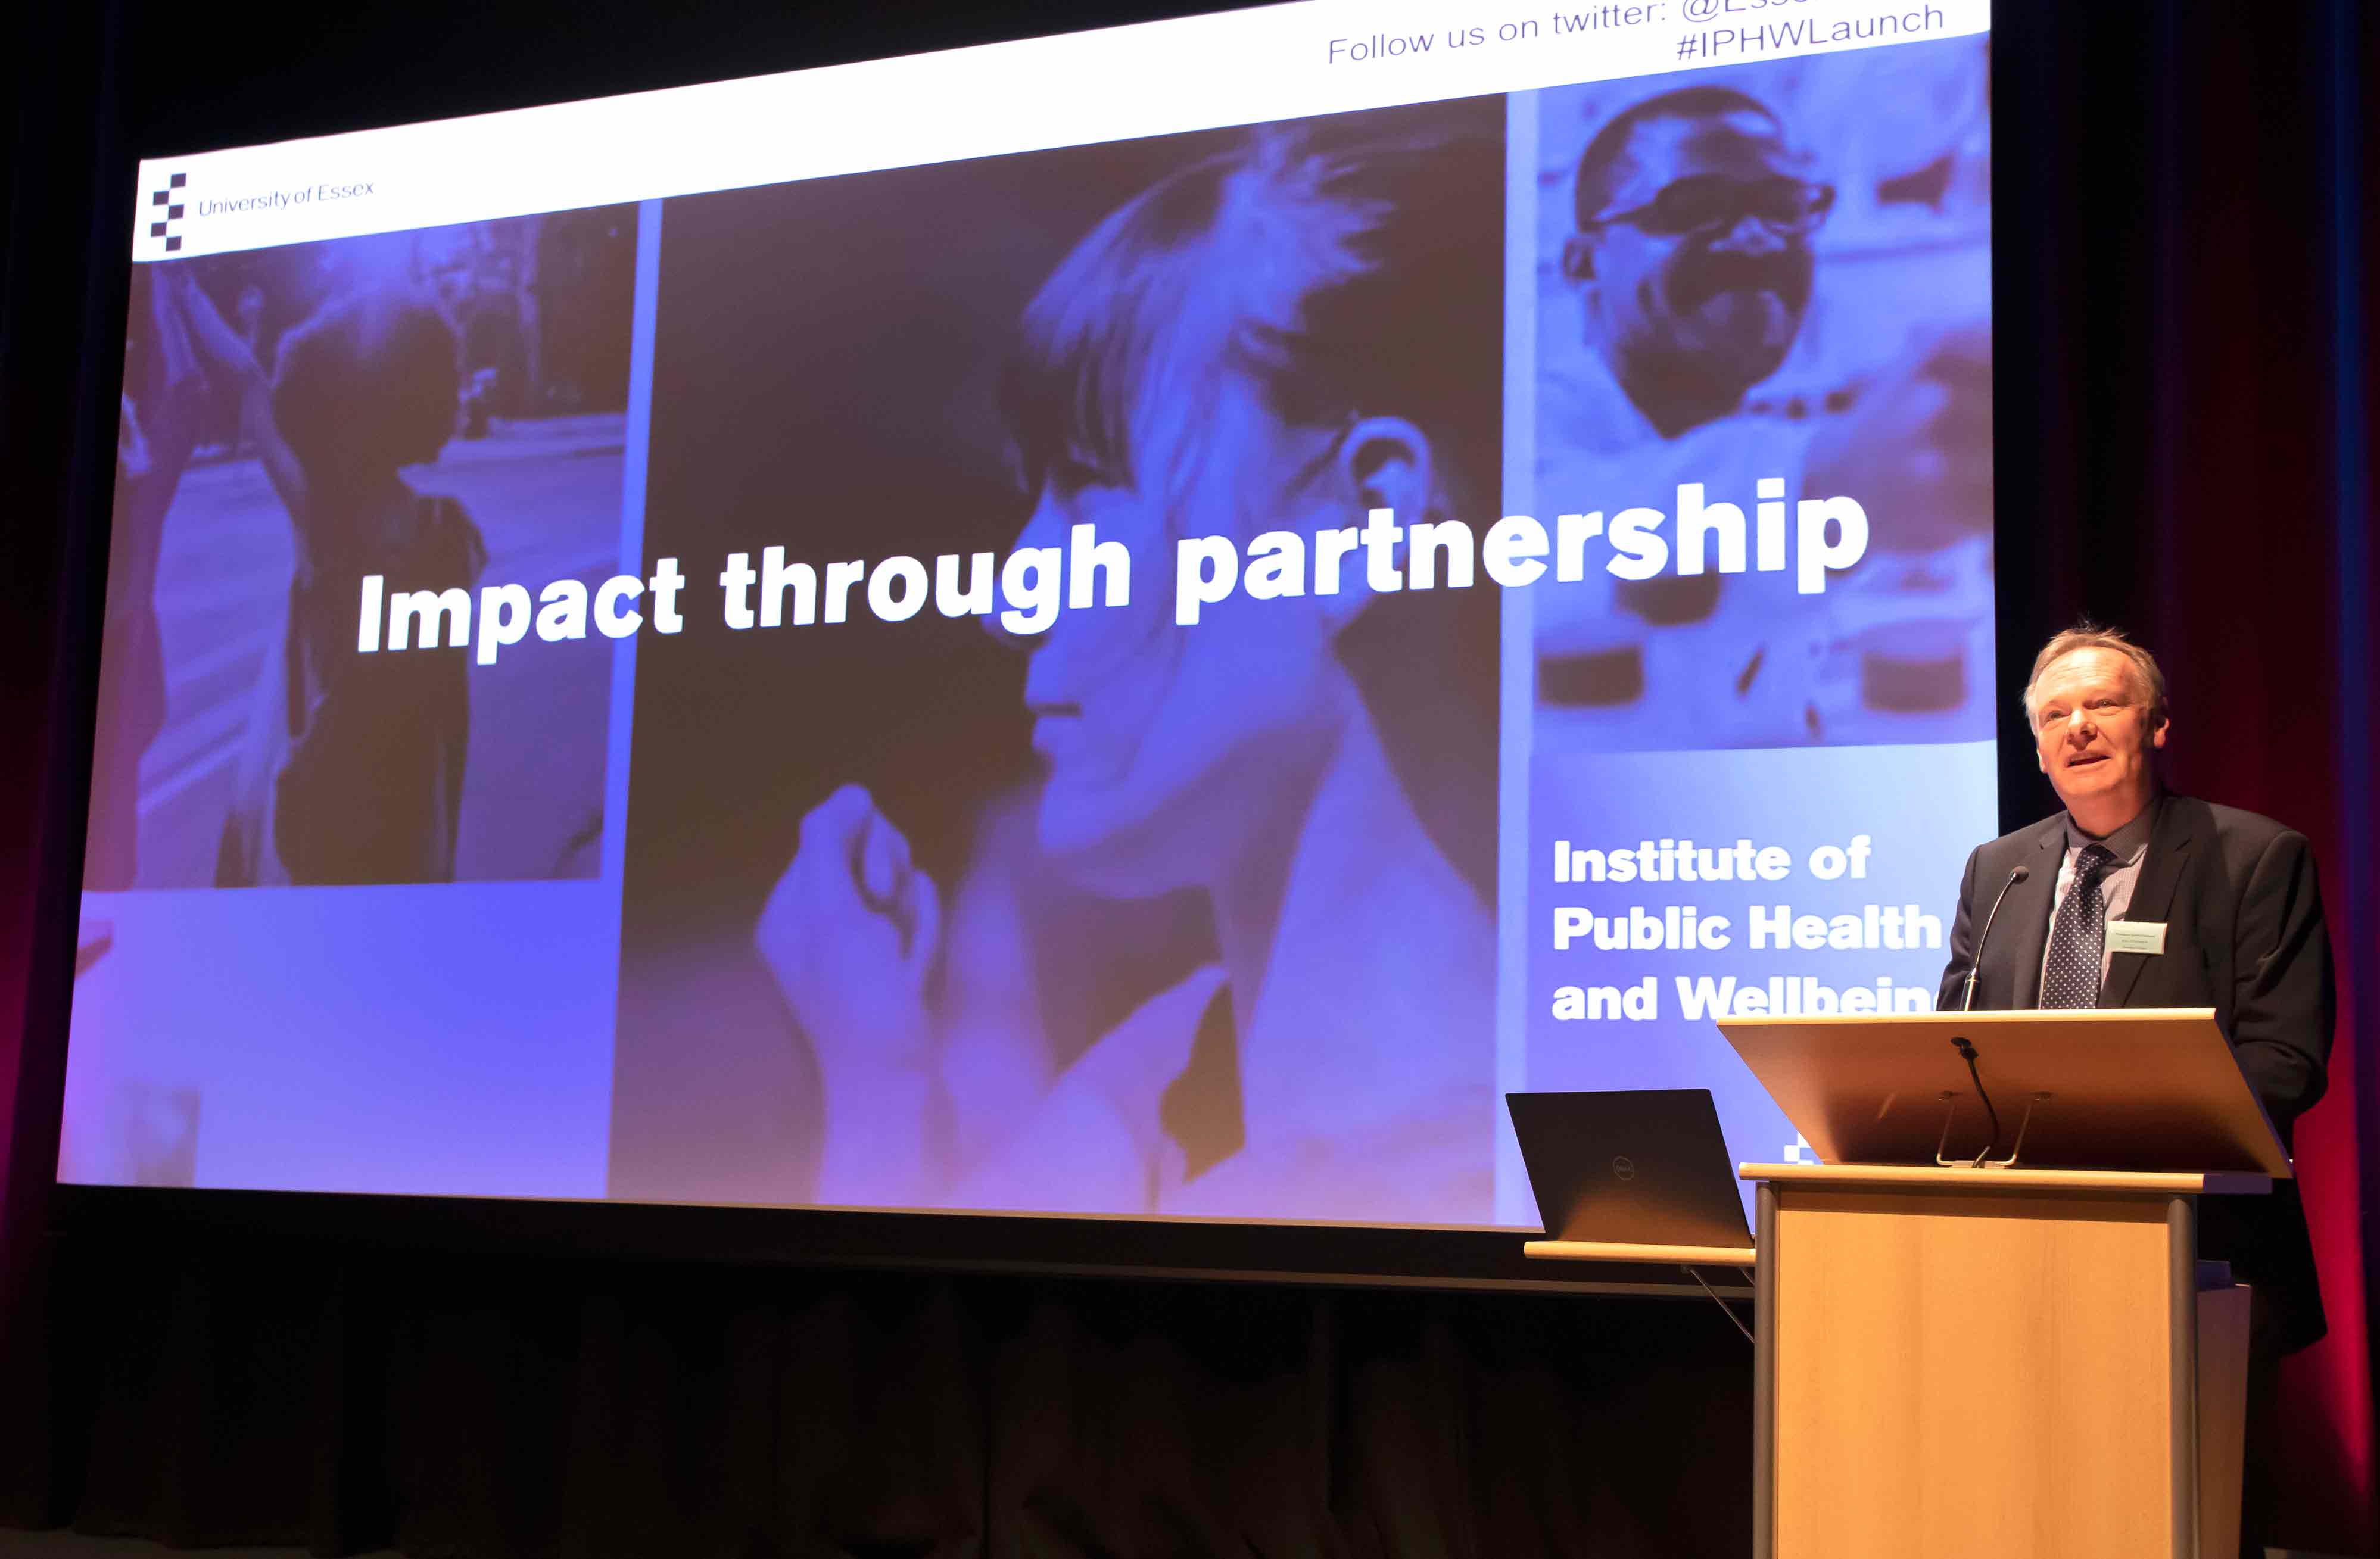 Impact through partnership: Building on our health and wellbeing foundations